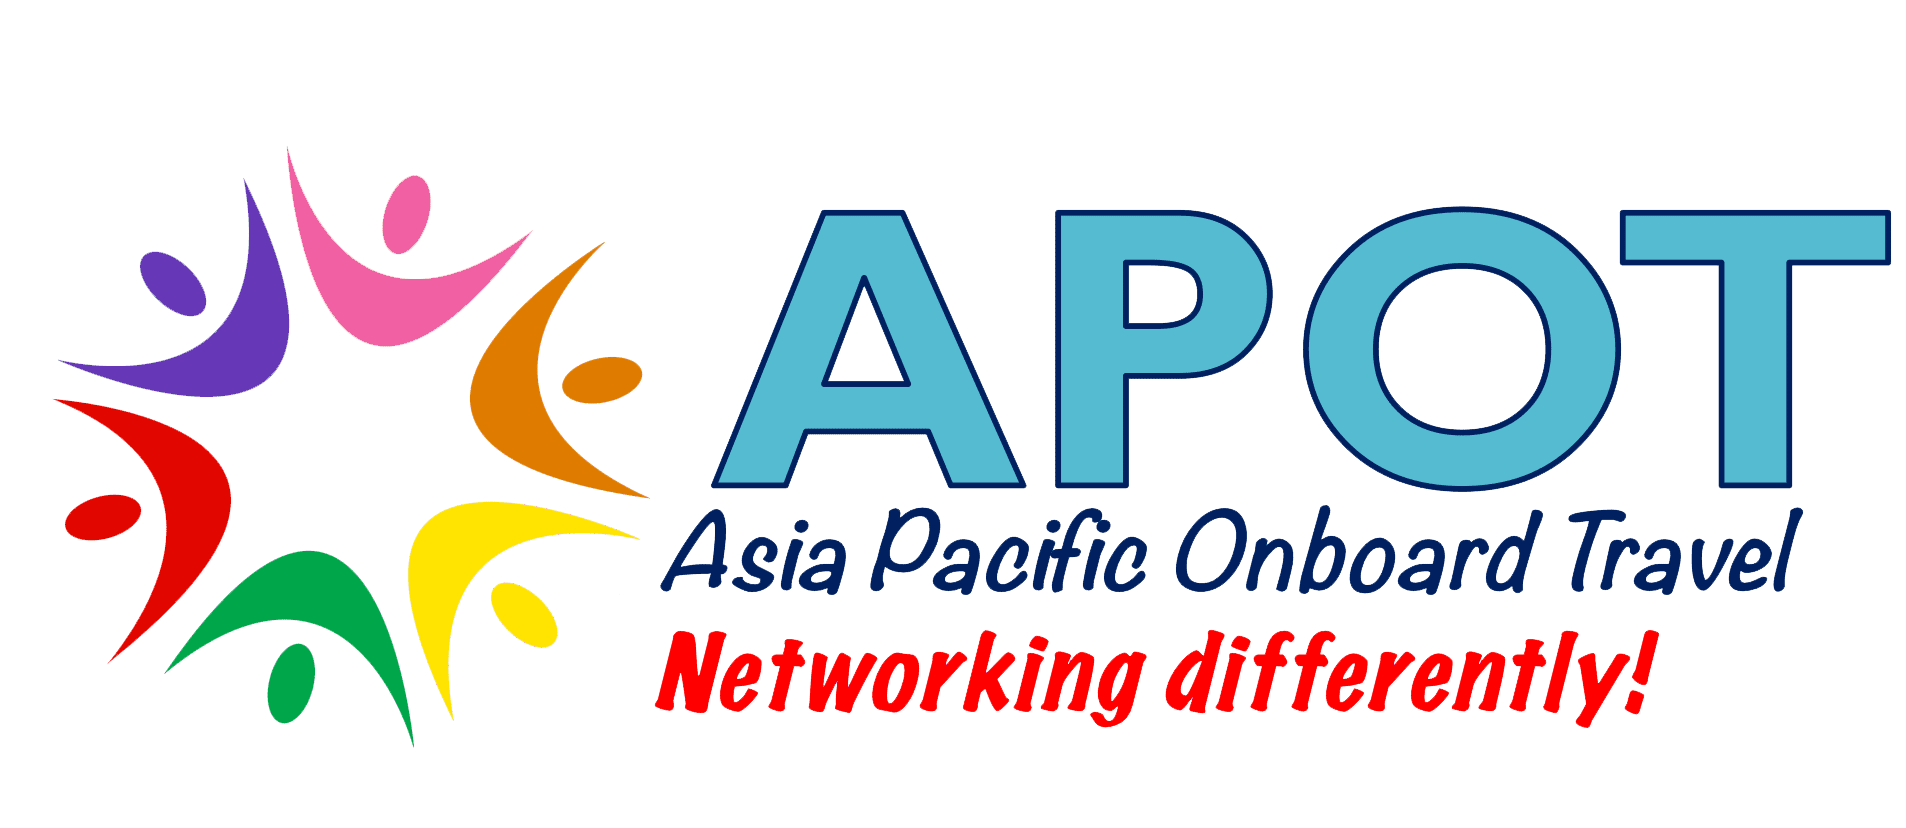 A logo for asia pacific onboarding and networking.